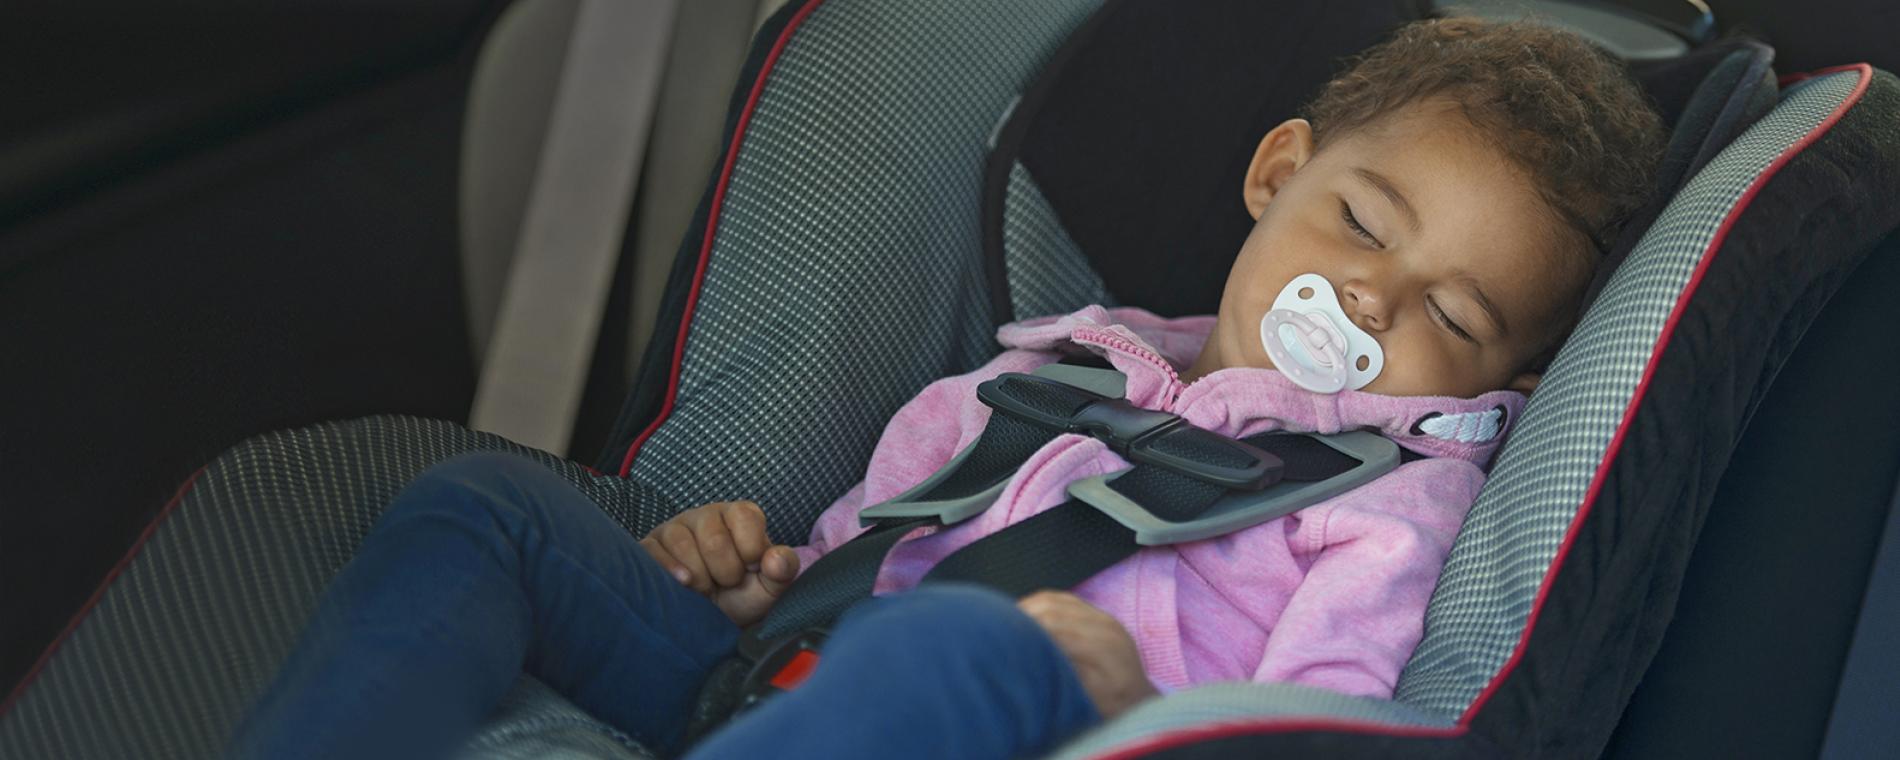 Help prevent pediatric vehicular heatstroke with these tips.